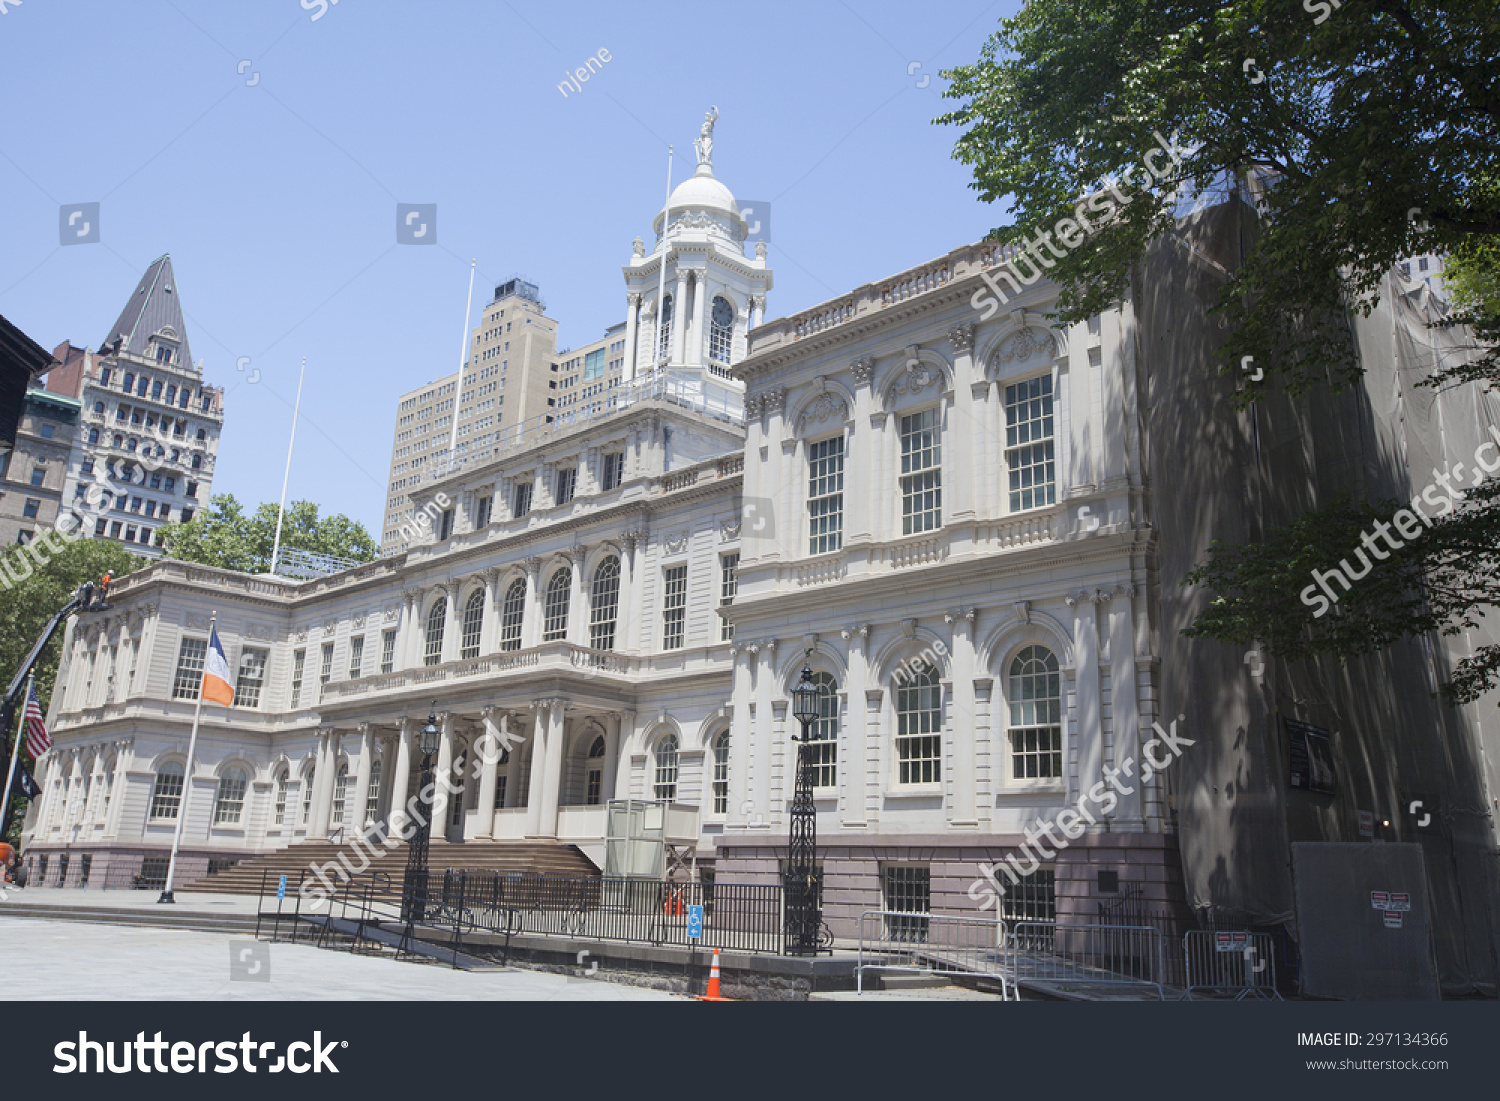 NEW YORK - May 30, 2015: New York City Hall is located at the center of City Hall Park in the Civic Center area of Lower Manhattan, New York City, between Broadway, Park Row, and Chambers Street. #297134366